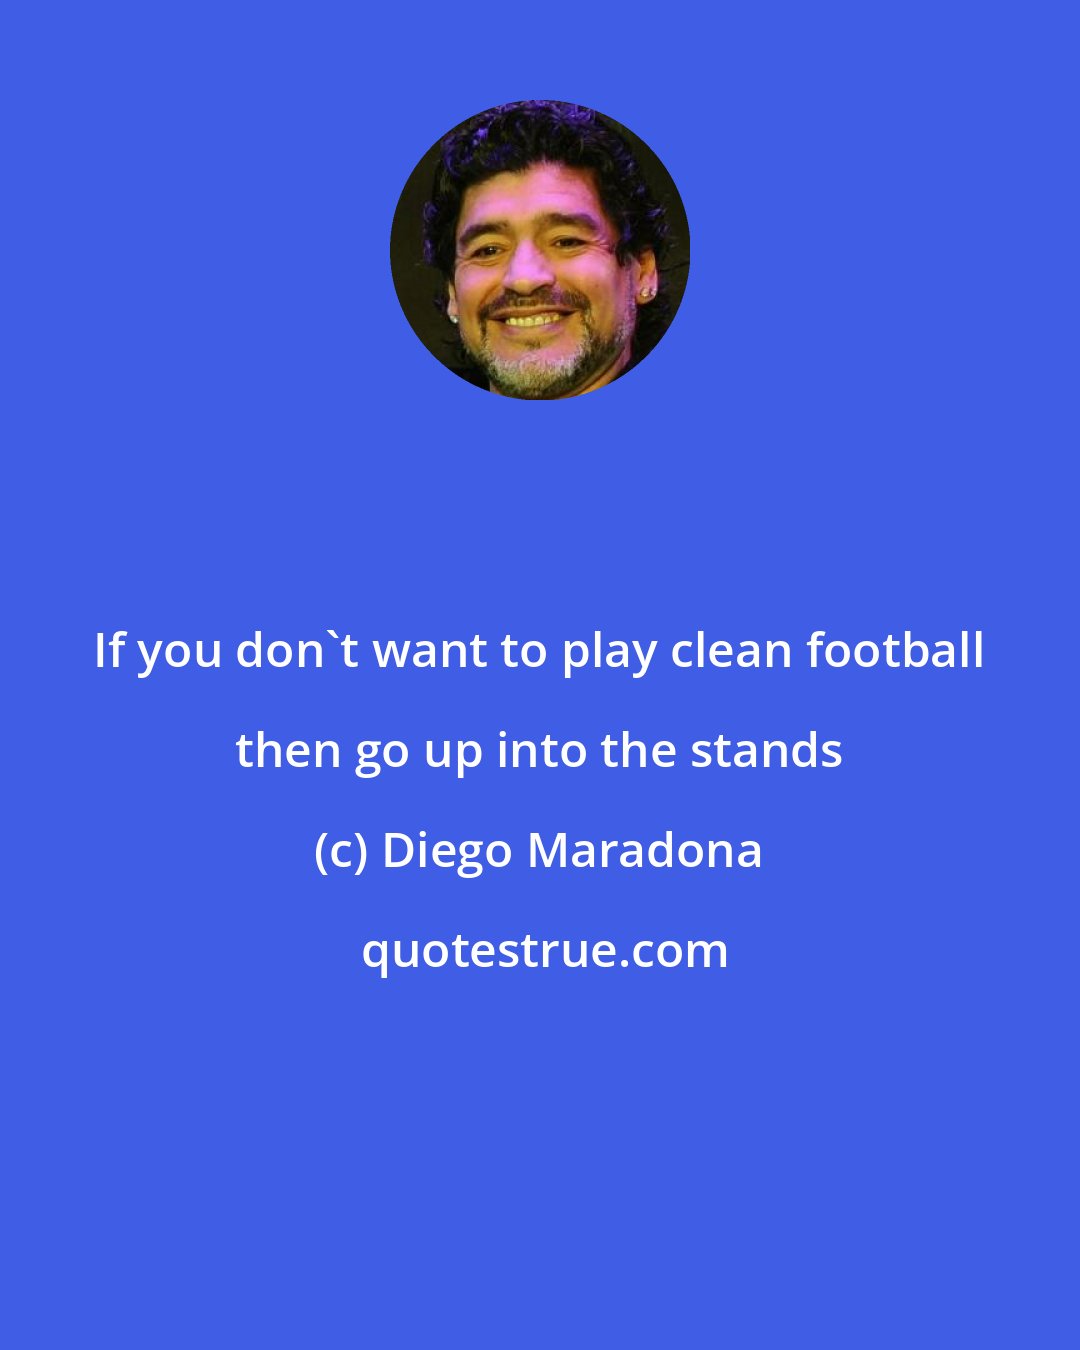 Diego Maradona: If you don't want to play clean football then go up into the stands